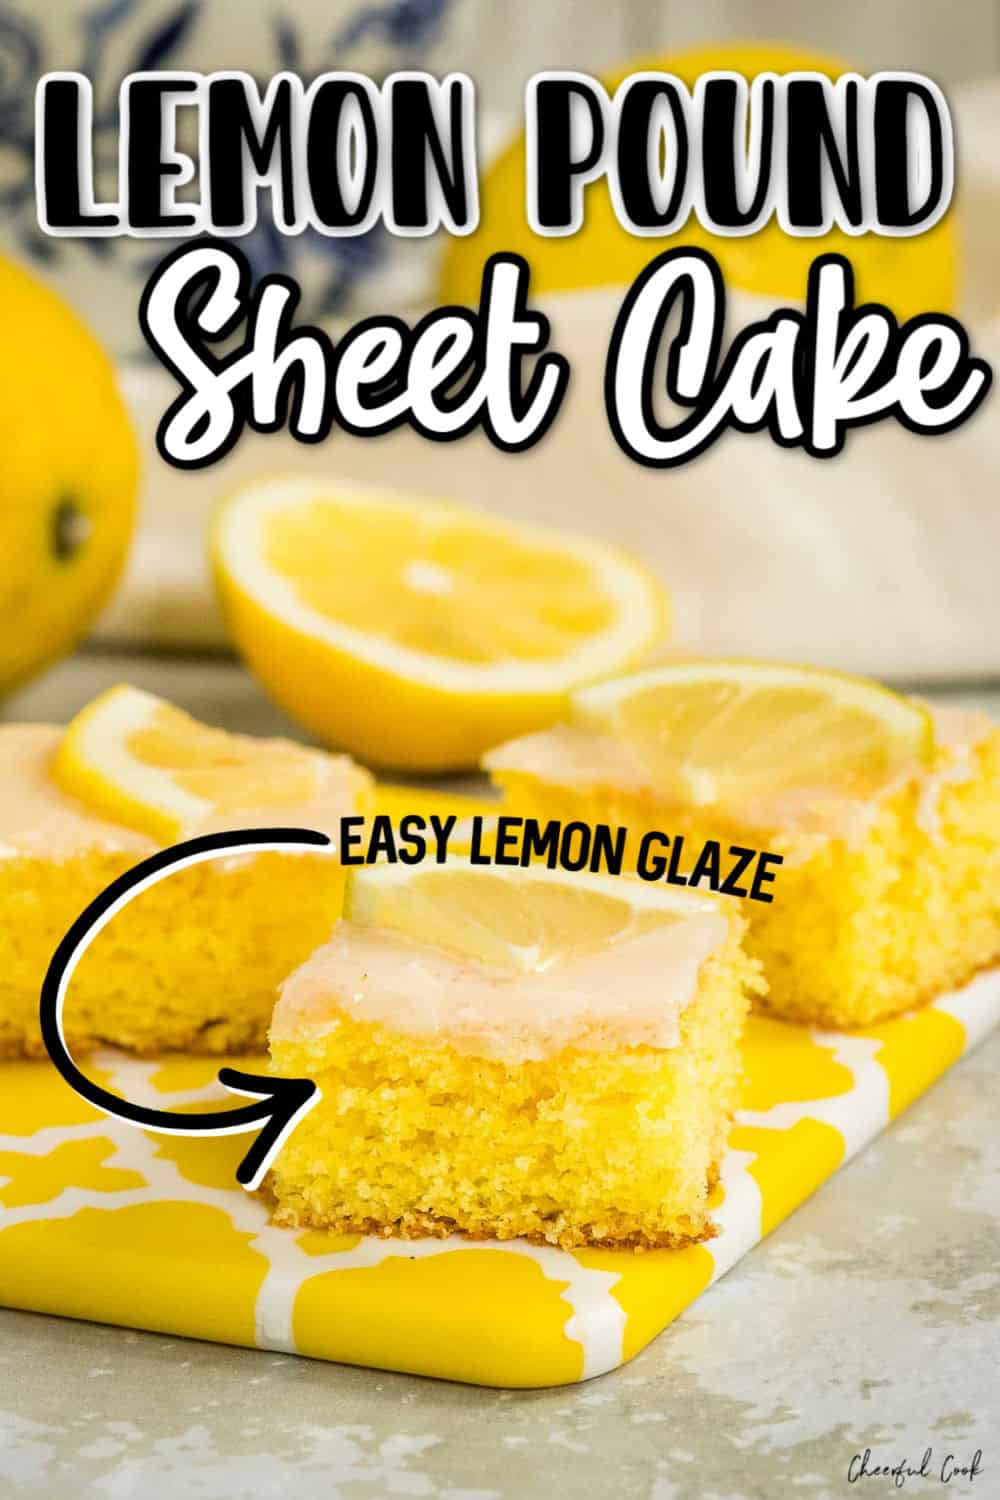 Light and airy, sweet and moist this lemon infused glazed German Pound Cake is incredibly delicious and easy to make. #cheerfulcook #german #lemon #poundcake #sheetcake #withglazeeasy ♡ cheerfulcook.com via @cheerfulcook